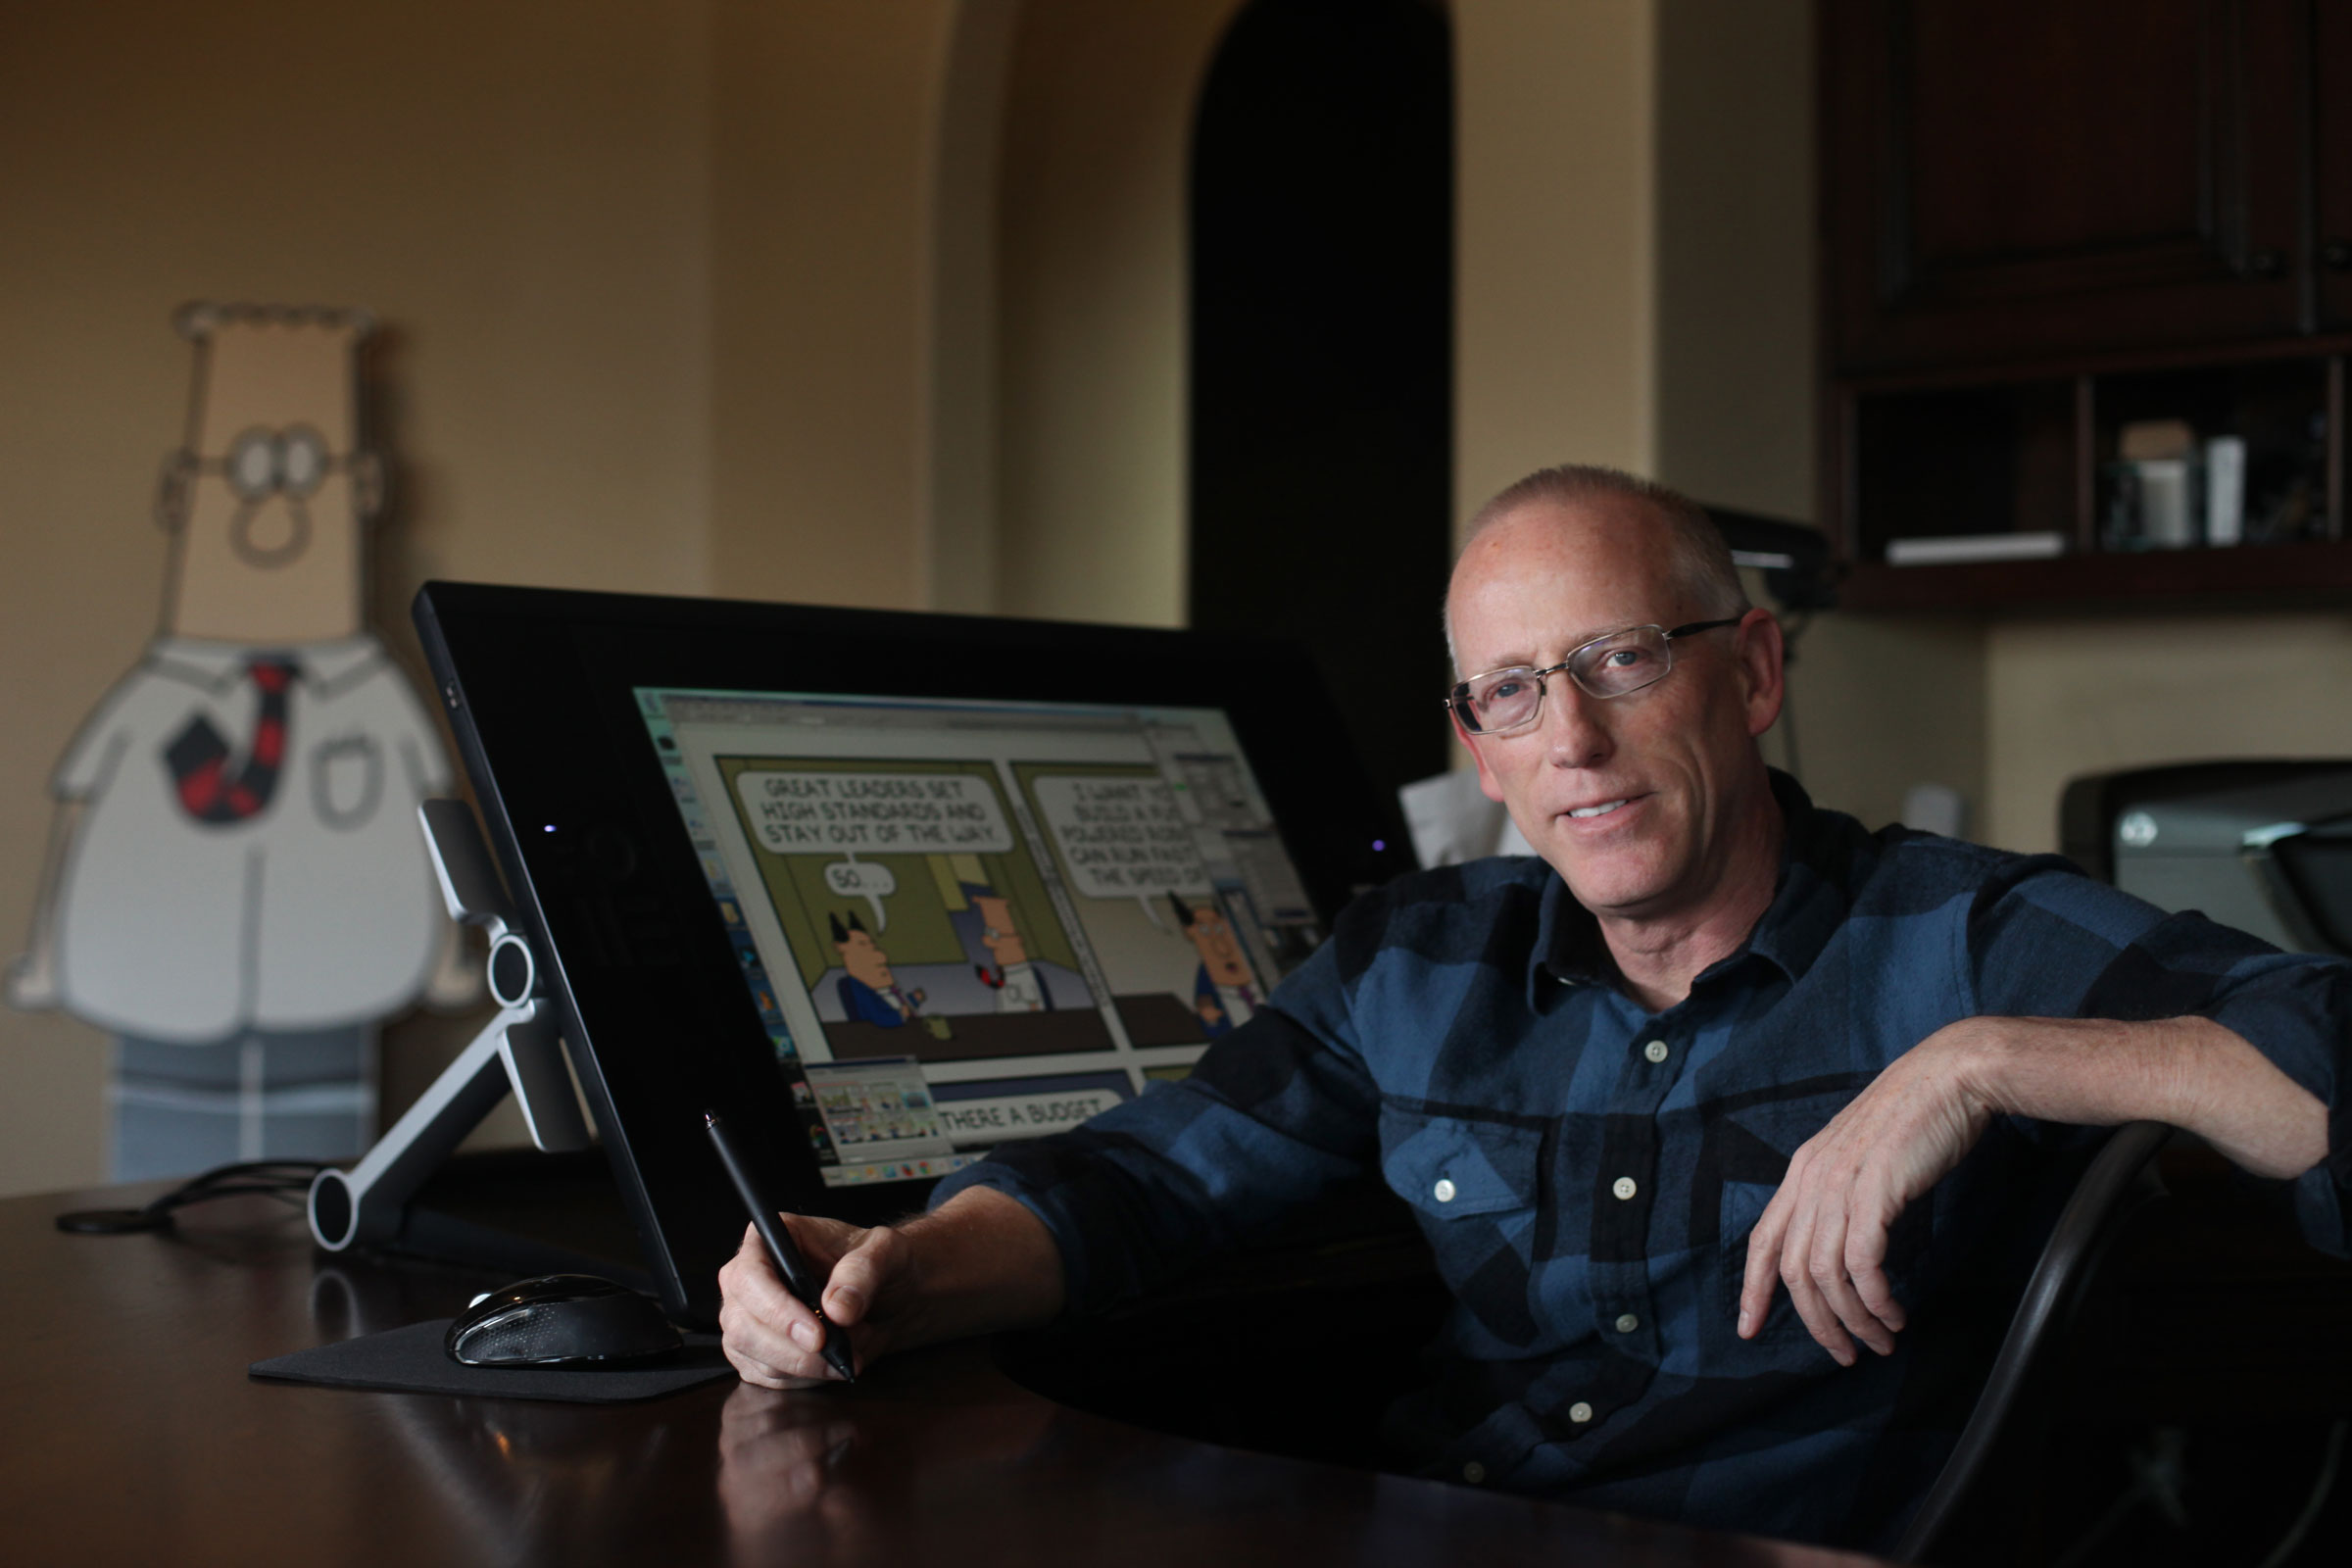 Scott Adams, cartoonist and author and creator of “Dilbert,” poses for a portrait in his home office in Pleasanton, Calif., on Jan. 6, 2014. (Lea Suzuki—The San Francisco Chronicle/Getty Images)